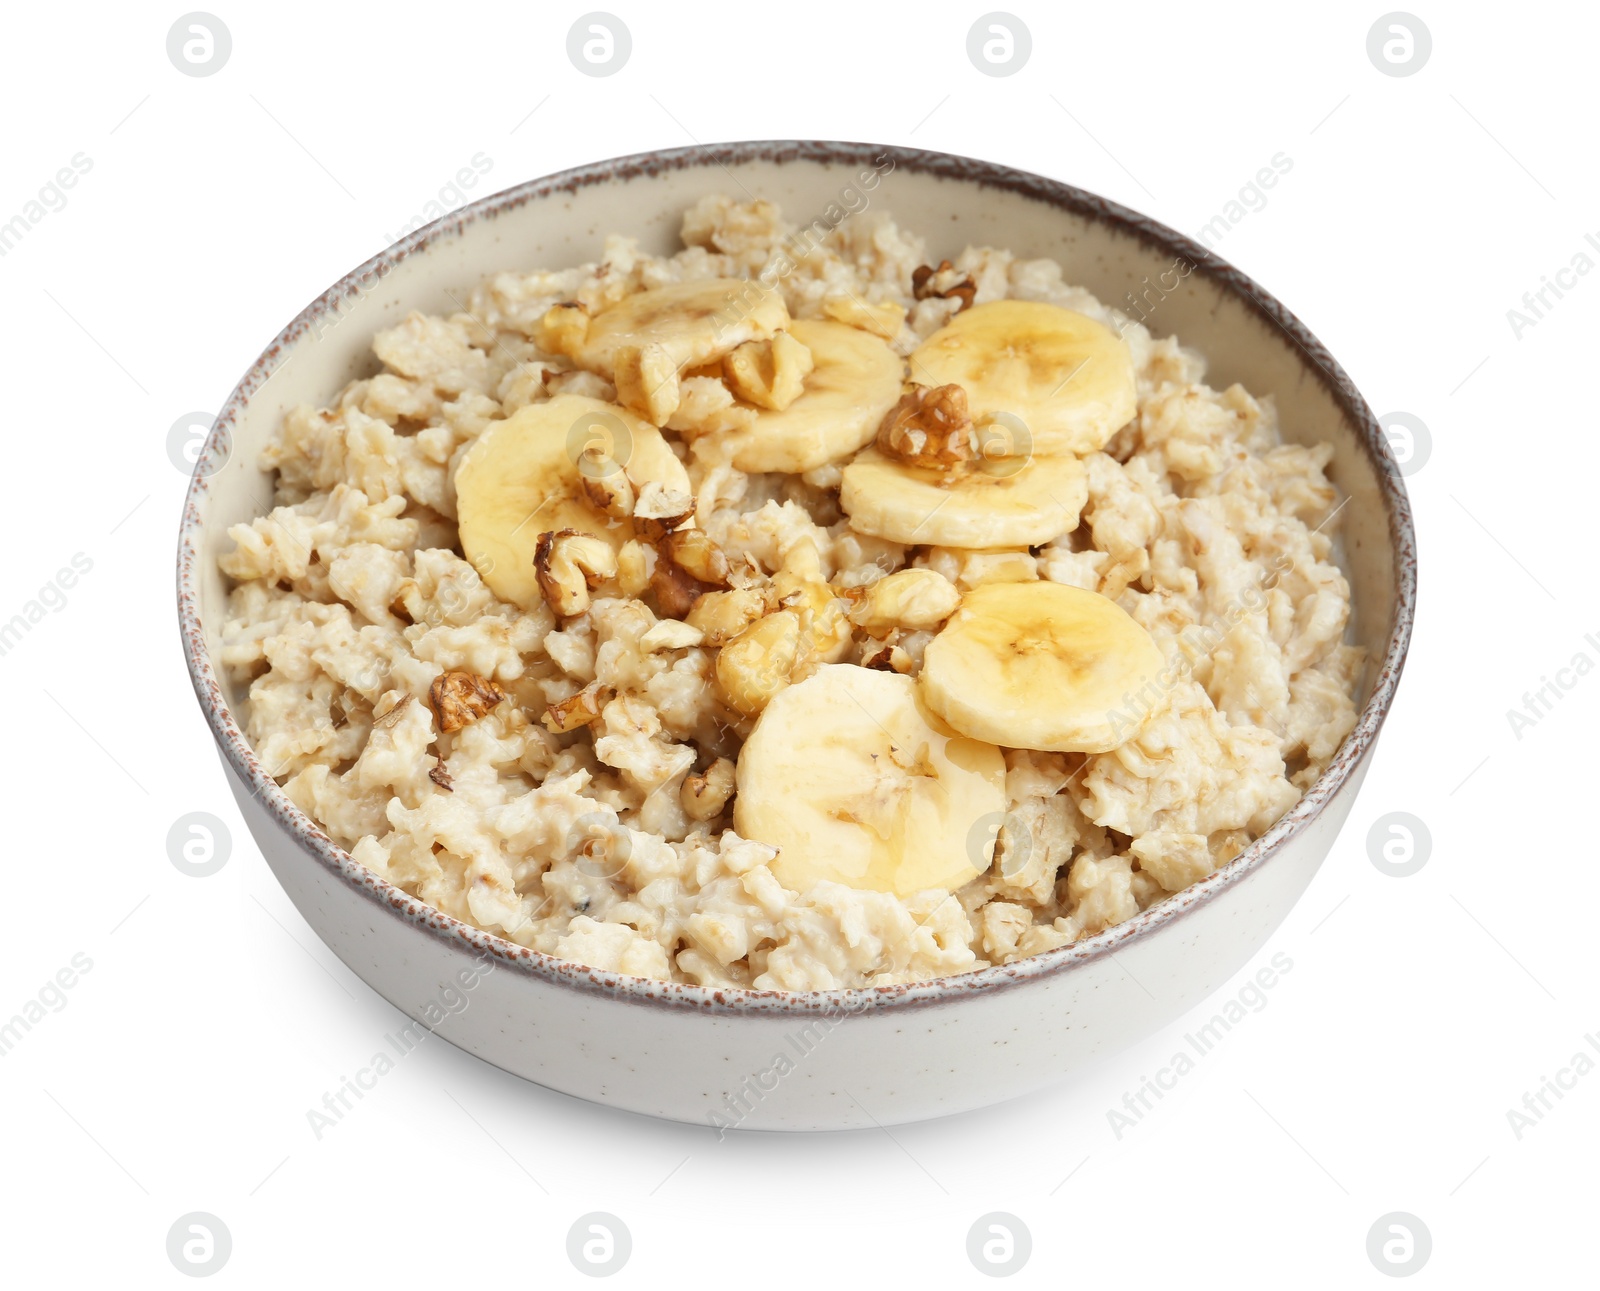 Photo of Tasty oatmeal with banana and walnuts in bowl isolated on white